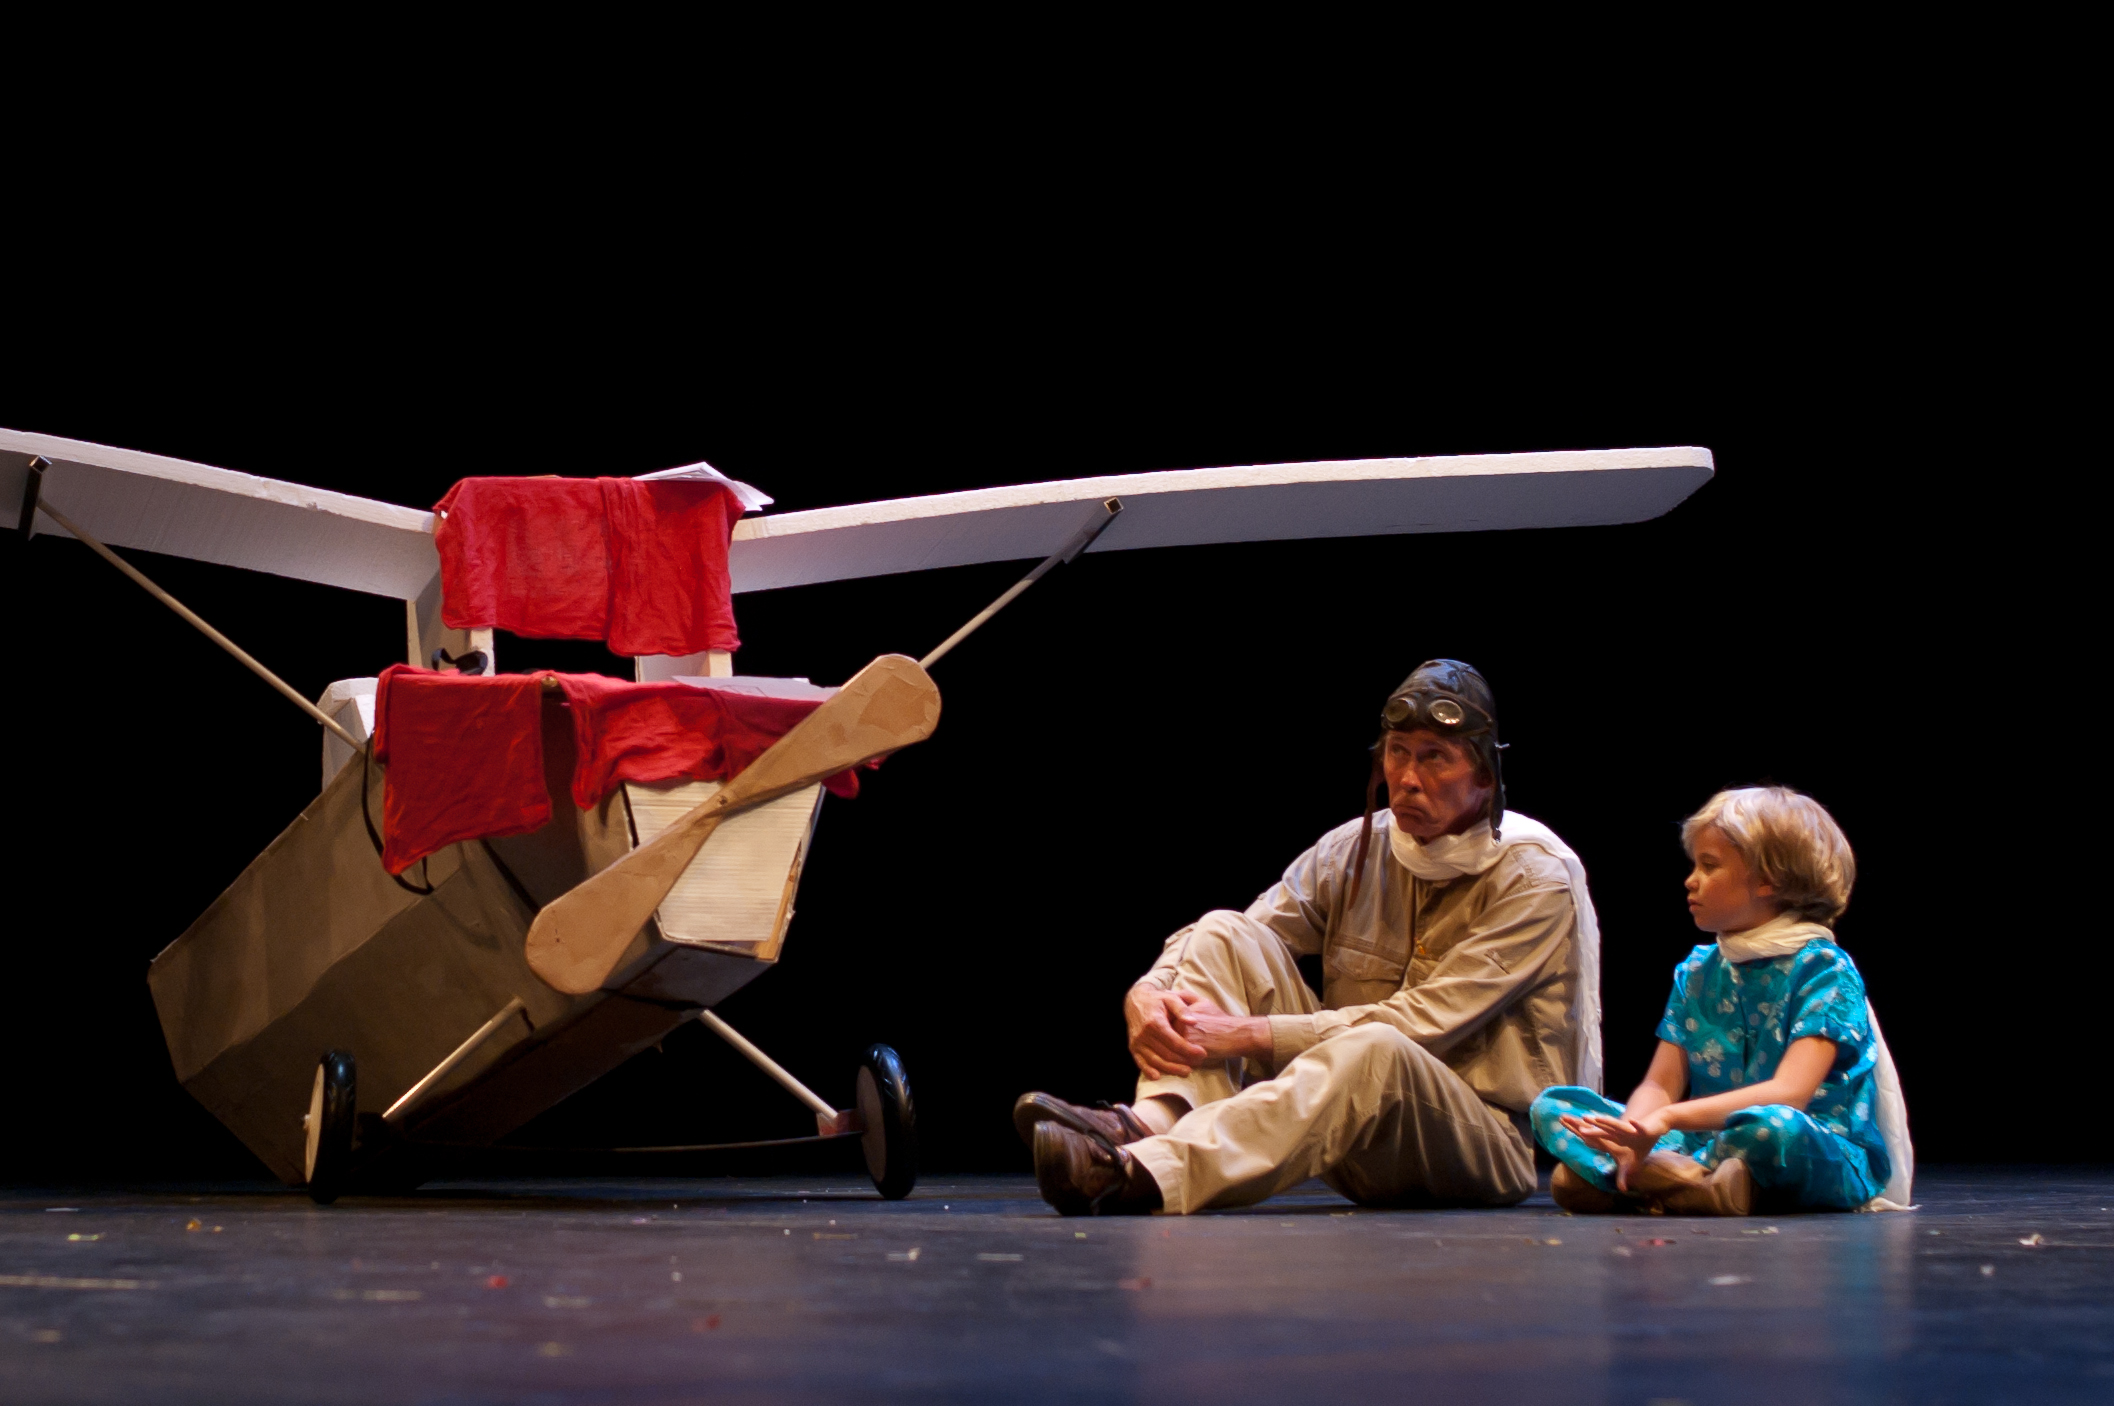 "The Little Prince", presented by Harmony Theatre Company and School at Rarig Proscenium. Photo: Dave Stagner.